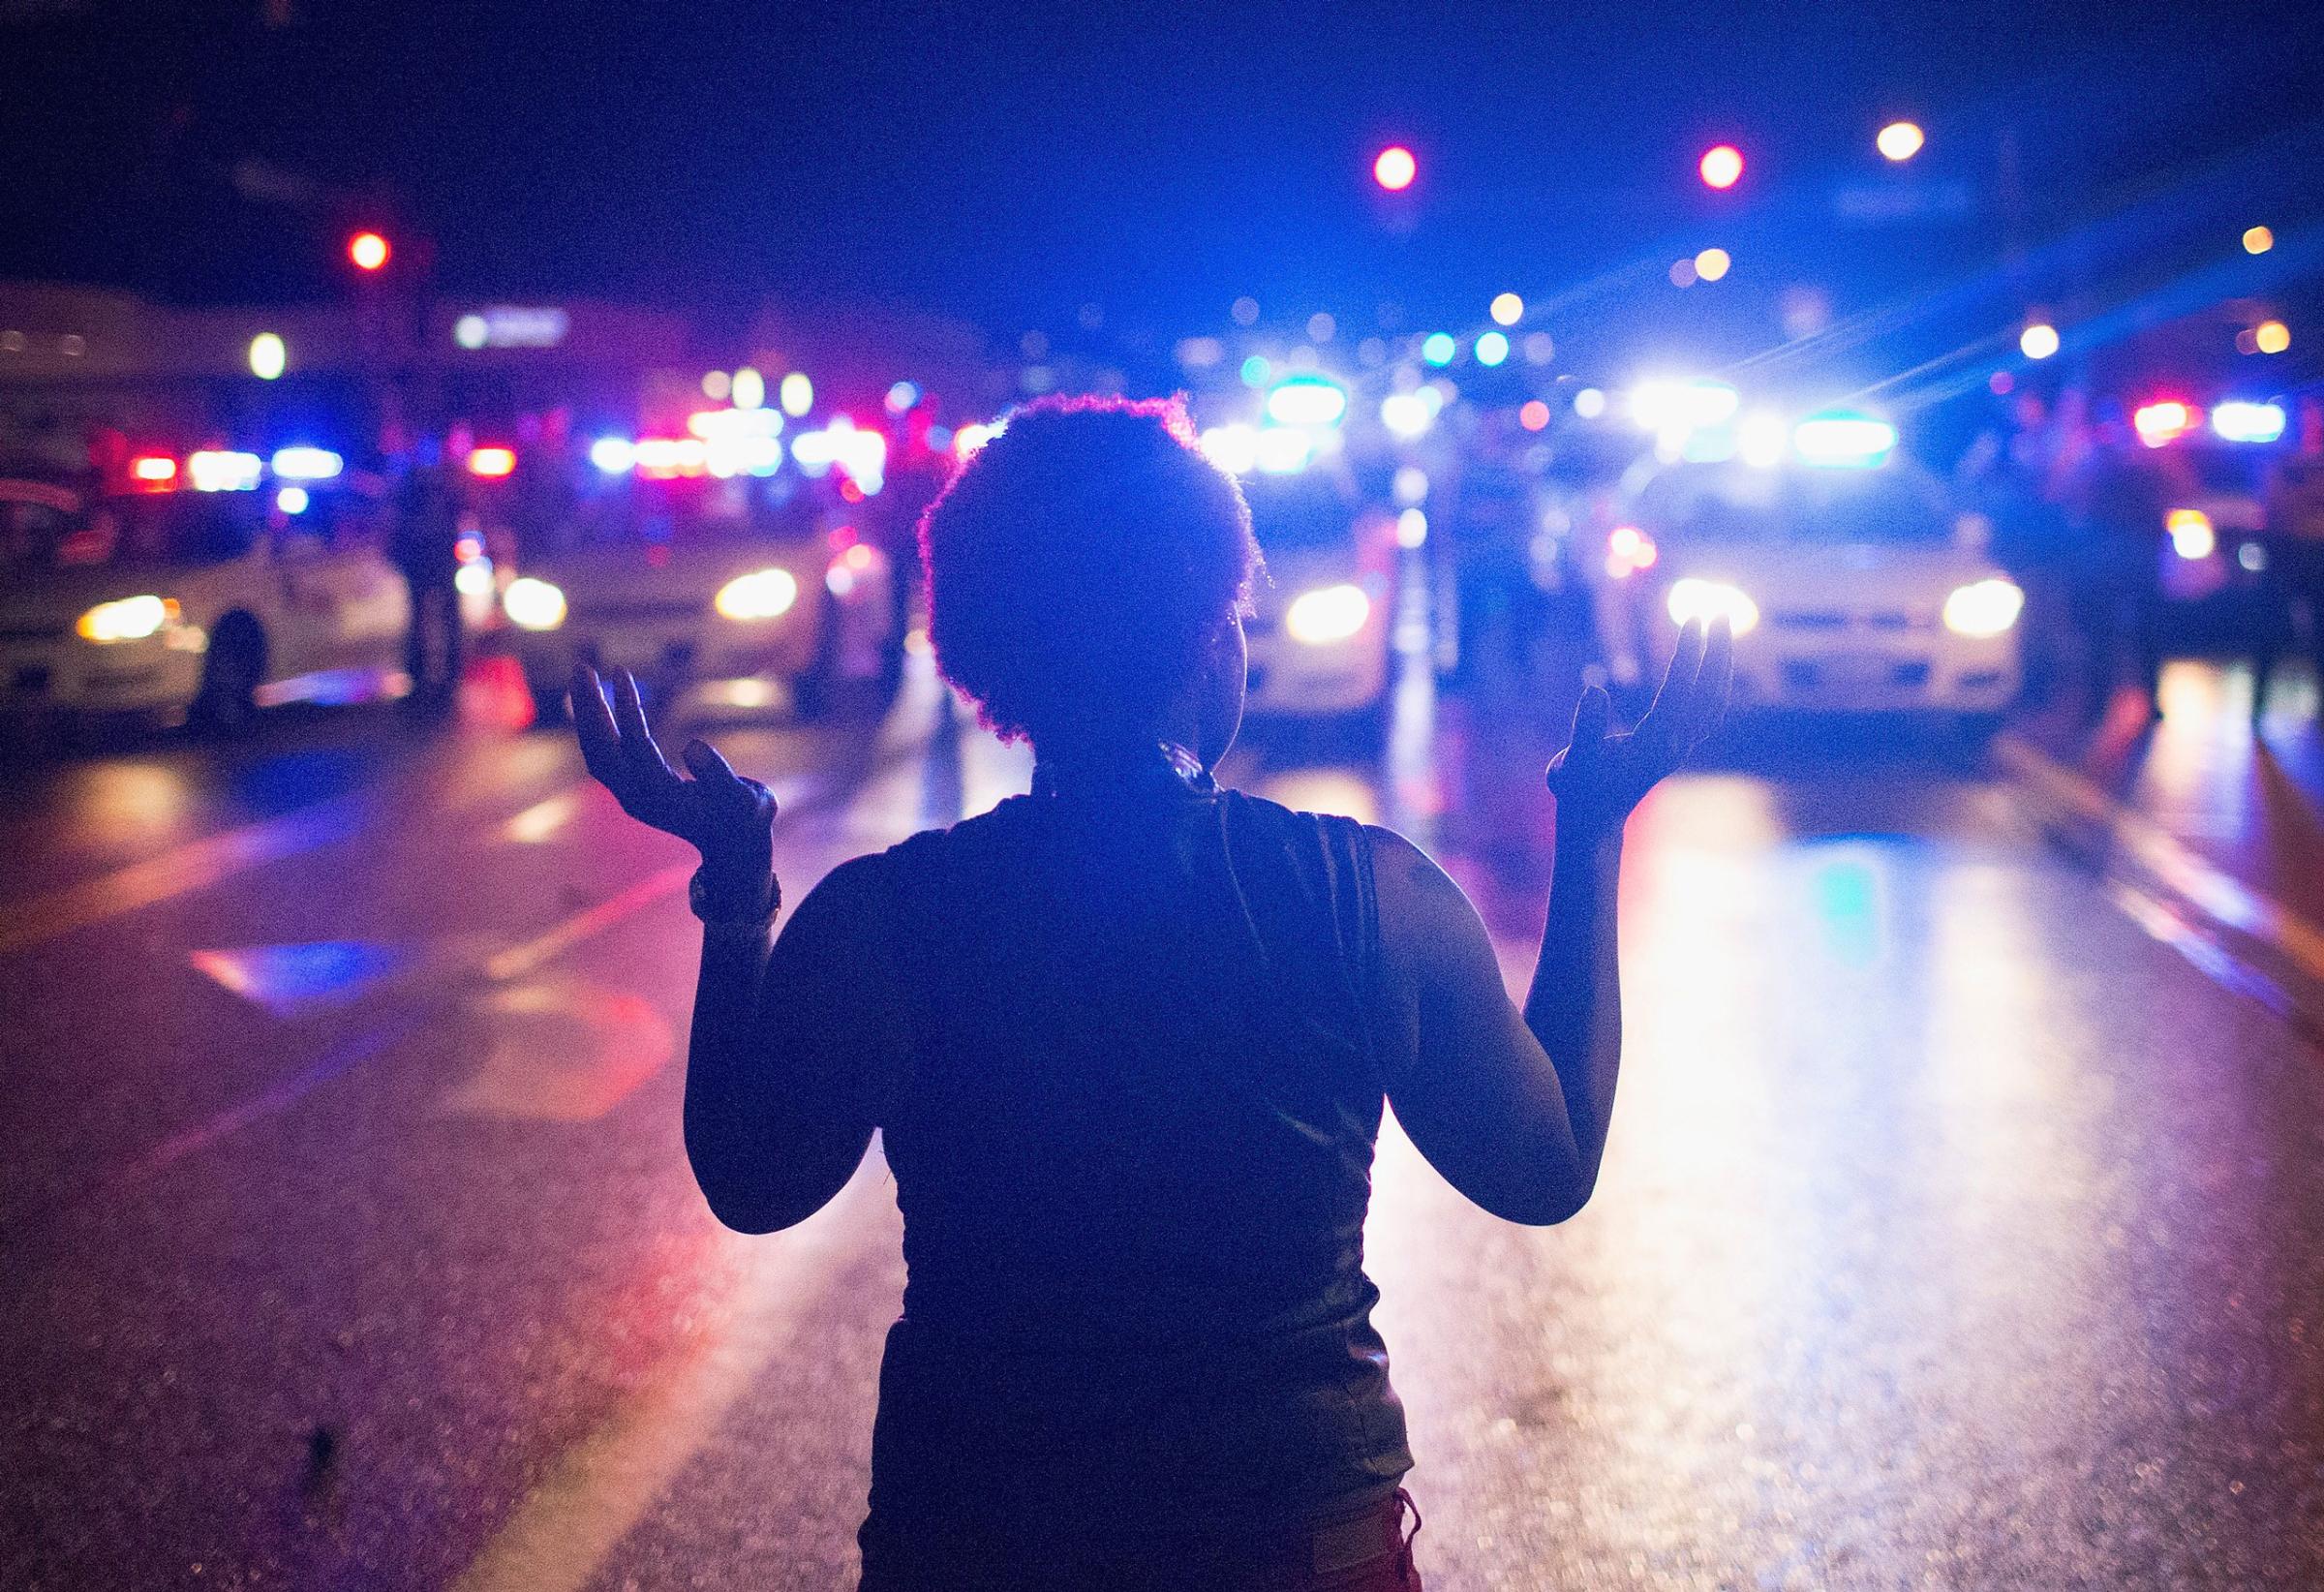 FERGUSON, MO - AUGUST 09: Demonstrators, marking the one-year anniversary of the shooting of Michael Brown, face off with police during a protest along West Florrisant Street on August 9, 2015 in Ferguson, Missouri. There are reports that two people were shot when gun fire broke out during protests later in the evening. Brown was shot and killed by a Ferguson police officer on August 9, 2014. His death sparked months of sometimes violent protests in Ferguson and drew nationwide focus on police treatment of black offenders. (Photo by Scott Olson/Getty Images)